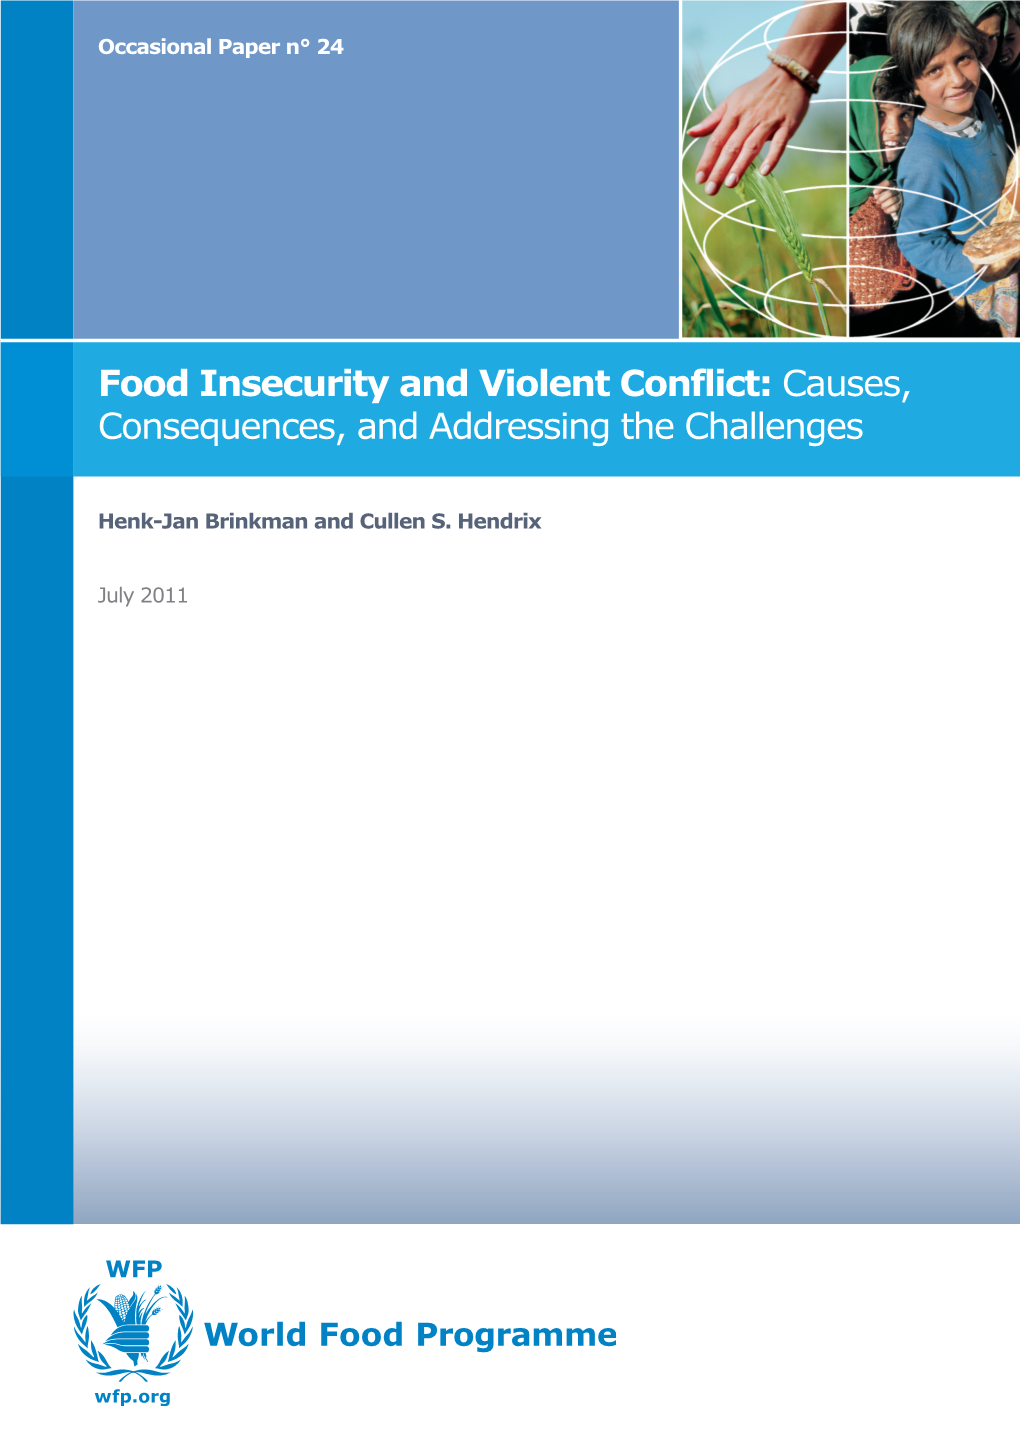 Food Insecurity and Violent Conflict: Causes, Consequences, and Addressing the Challenges